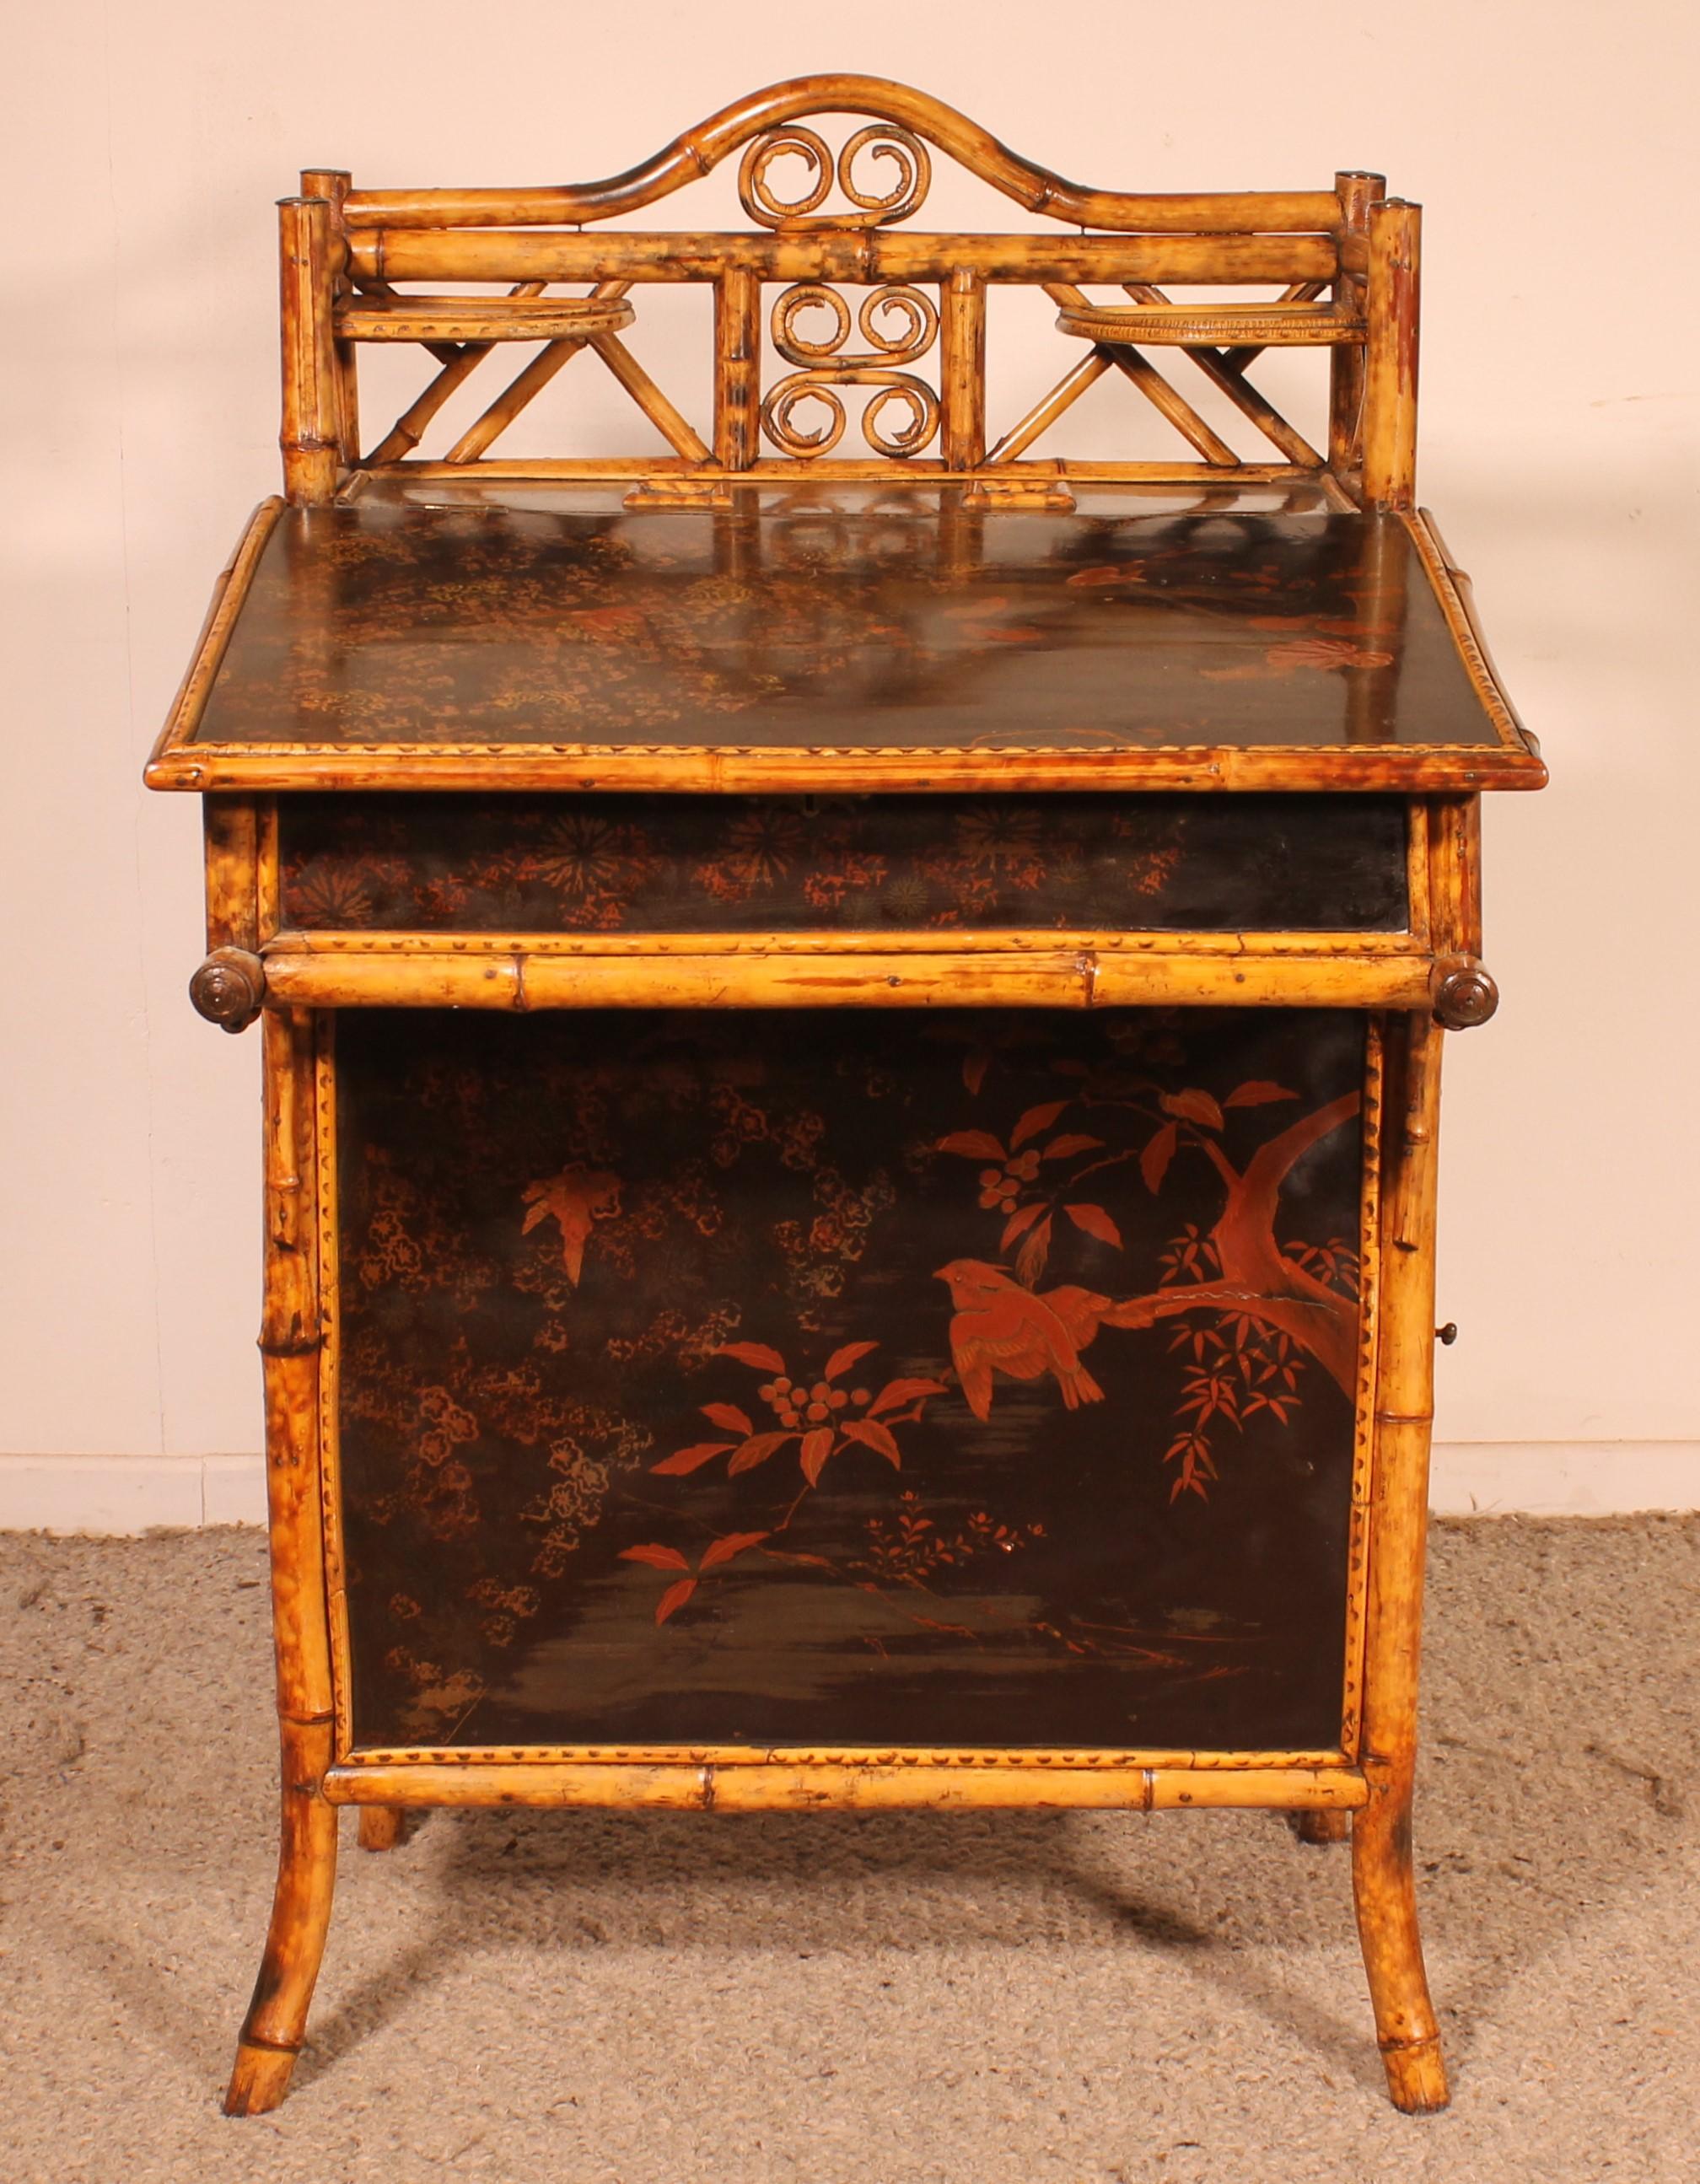 Aesthetic Movement Secretary/davenport In Bamboo And Lacquer With Asian Decor - 19th Century For Sale